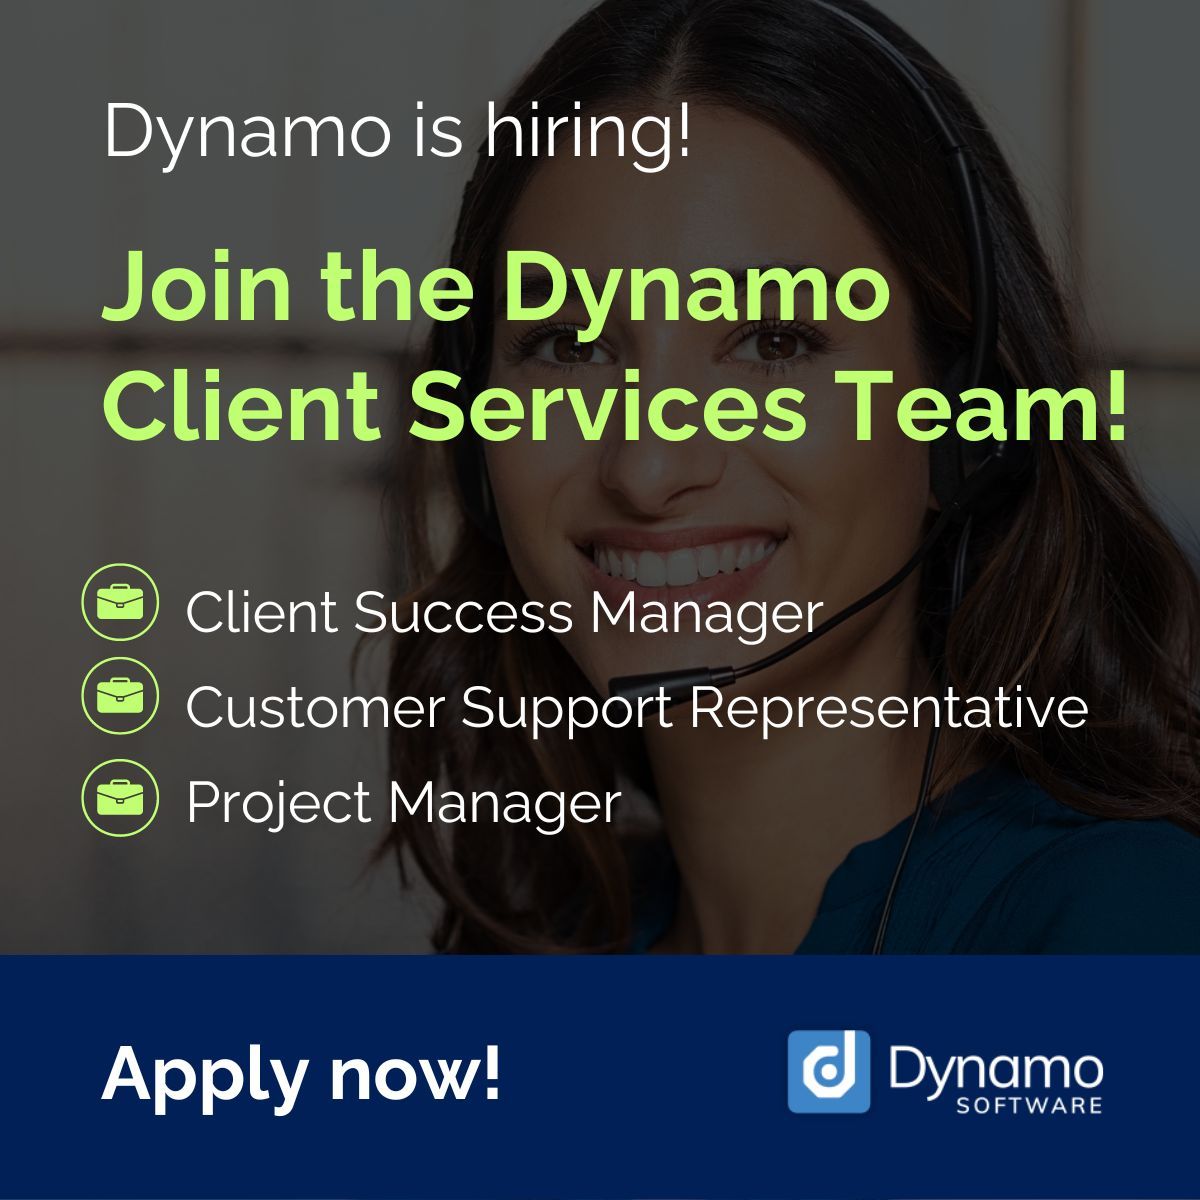 Explore new job opportunities at Dynamo!

The Dynamo Client Services team has several open positions that support our clients and help them reach their goals.

Learn more about these opportunities at 
buff.ly/43wNHA8

#DynamoCareers #TeamDynamo #ClientServices